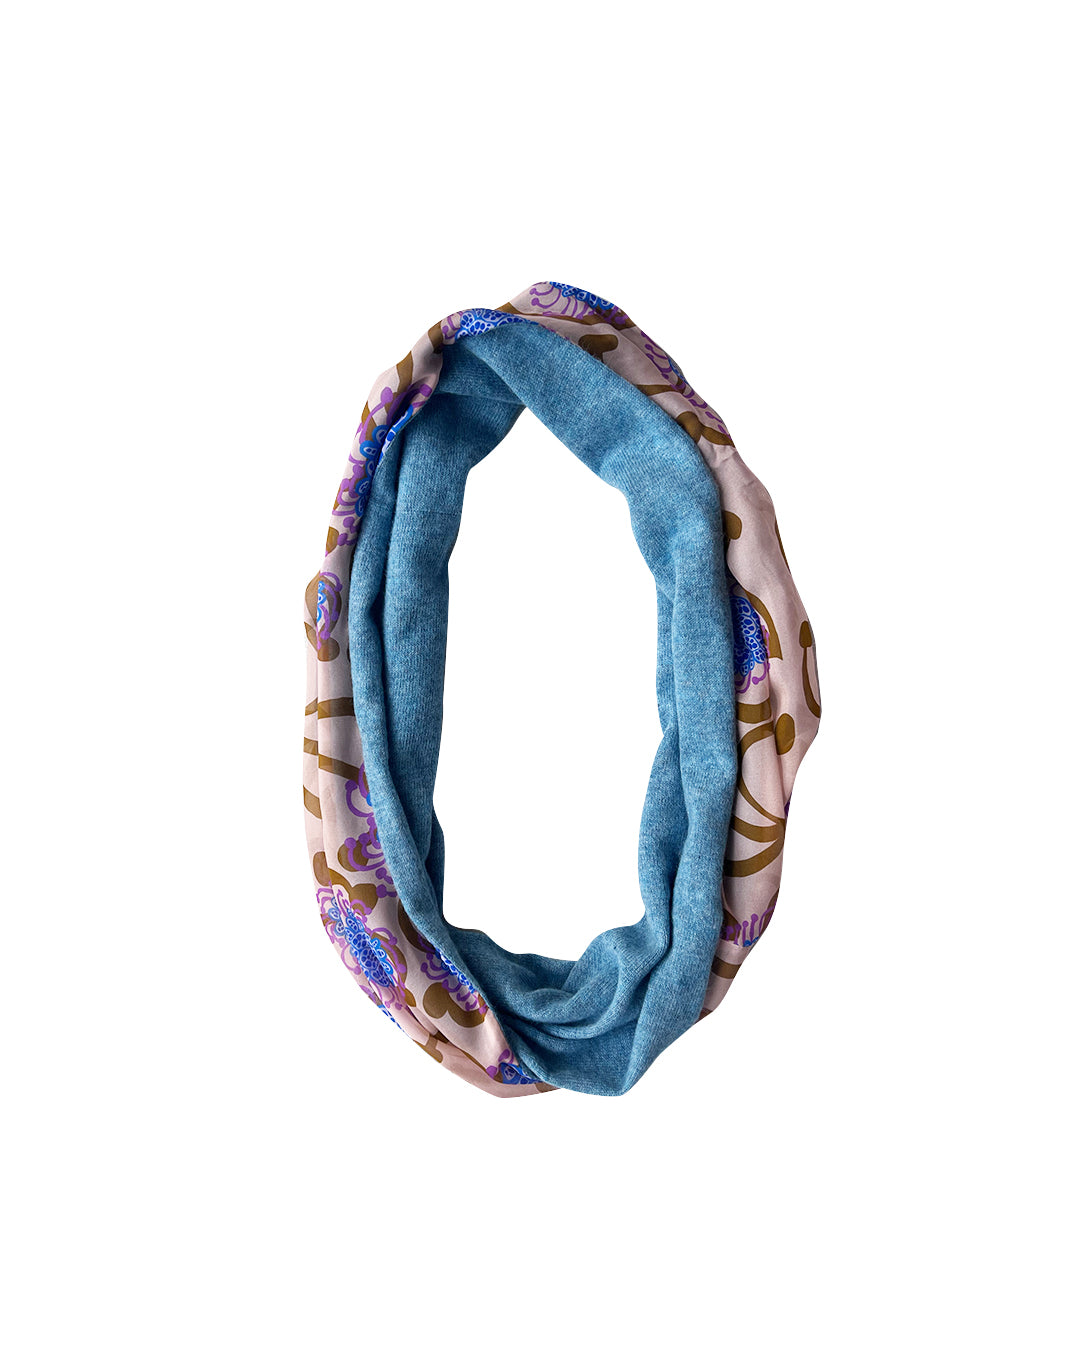 Apricot Alien flowers cashmere infinity loop blue scarf cukimber designs